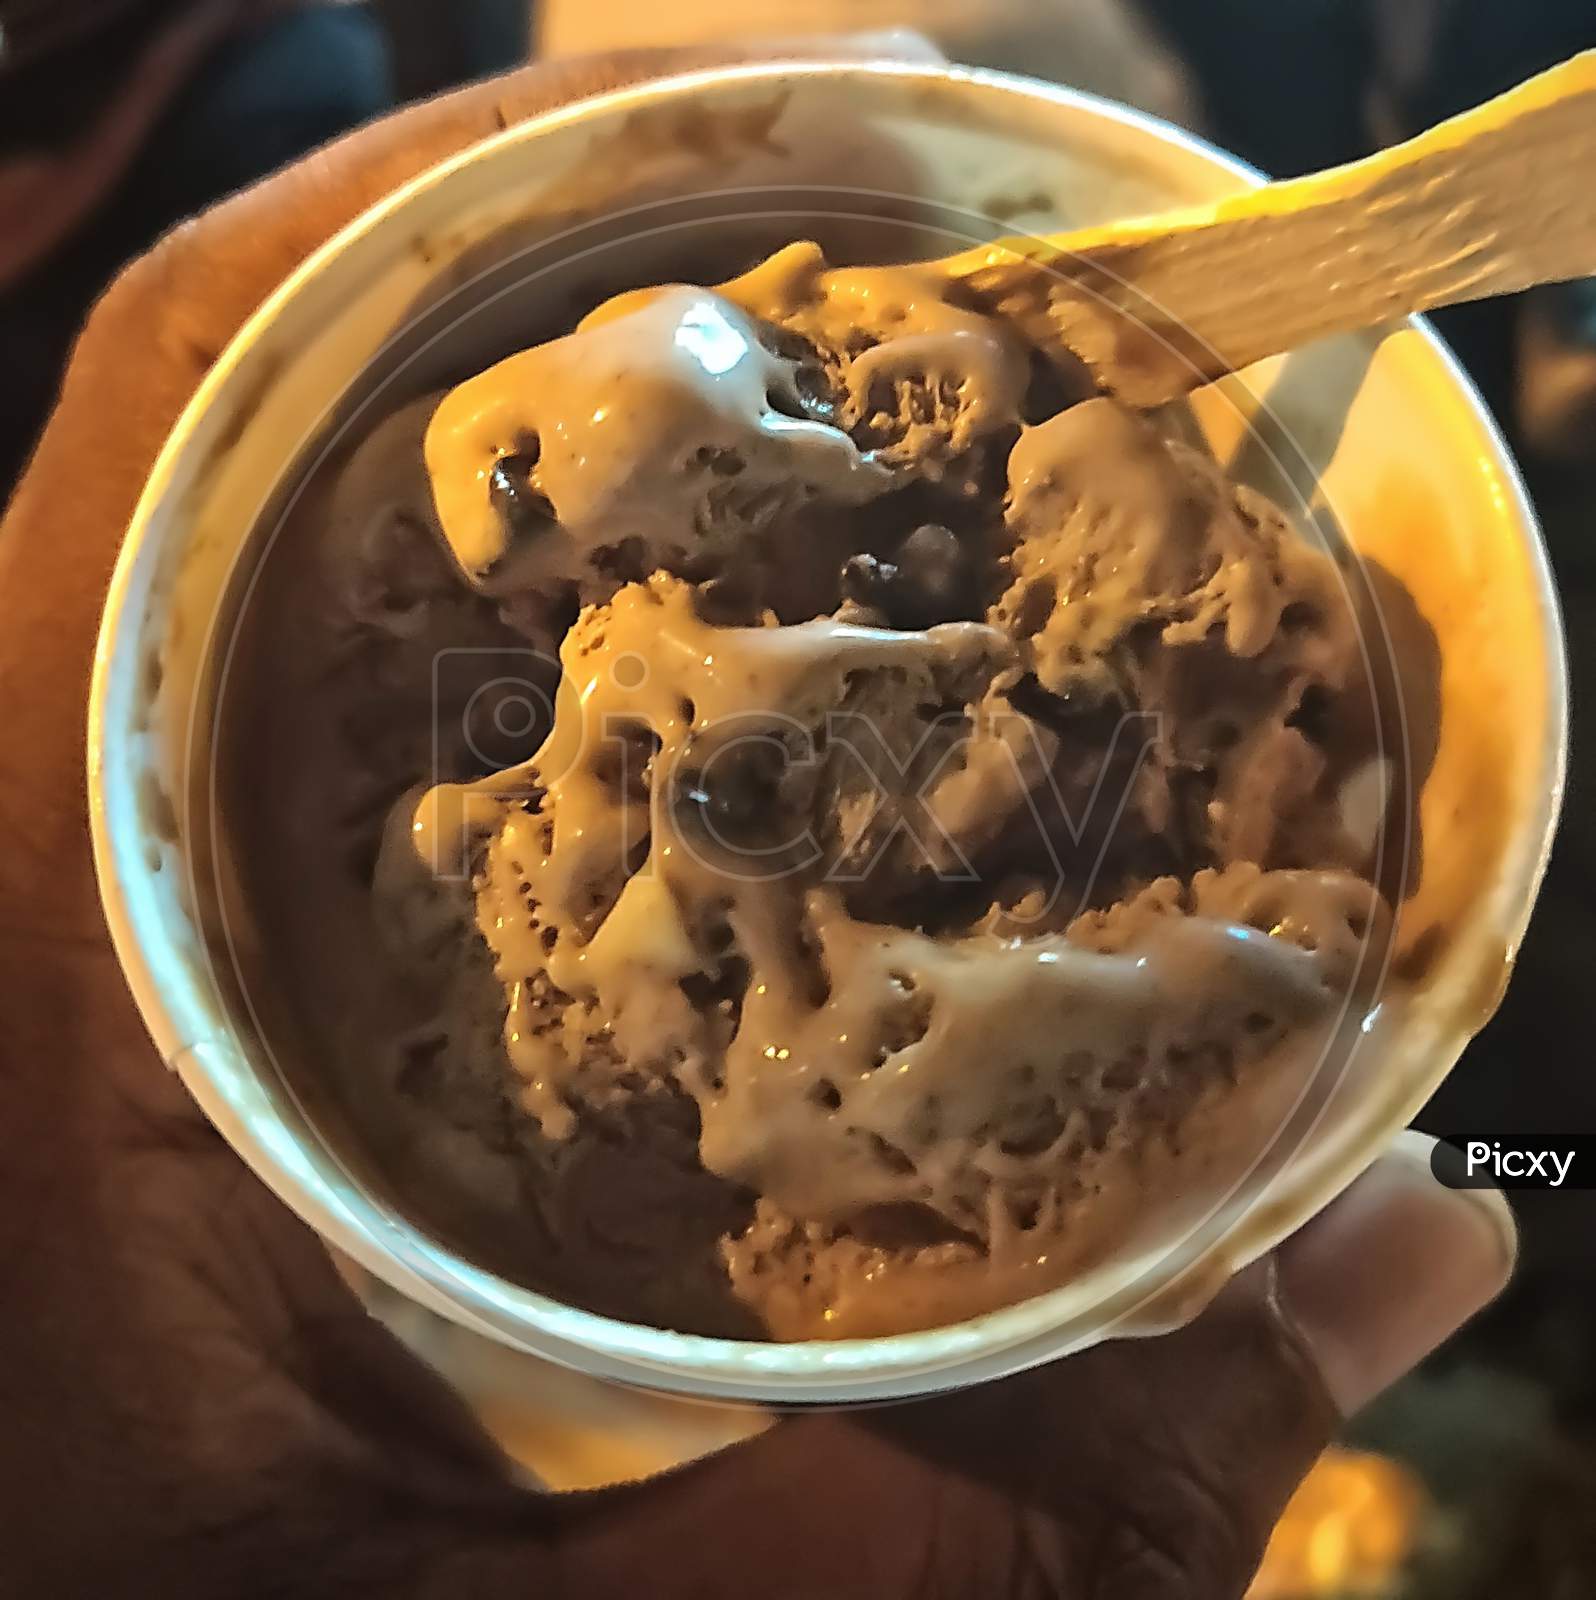 Small Scoop Of Chocolate Ice Cream With Wooden Ice Cream Spoon On It.